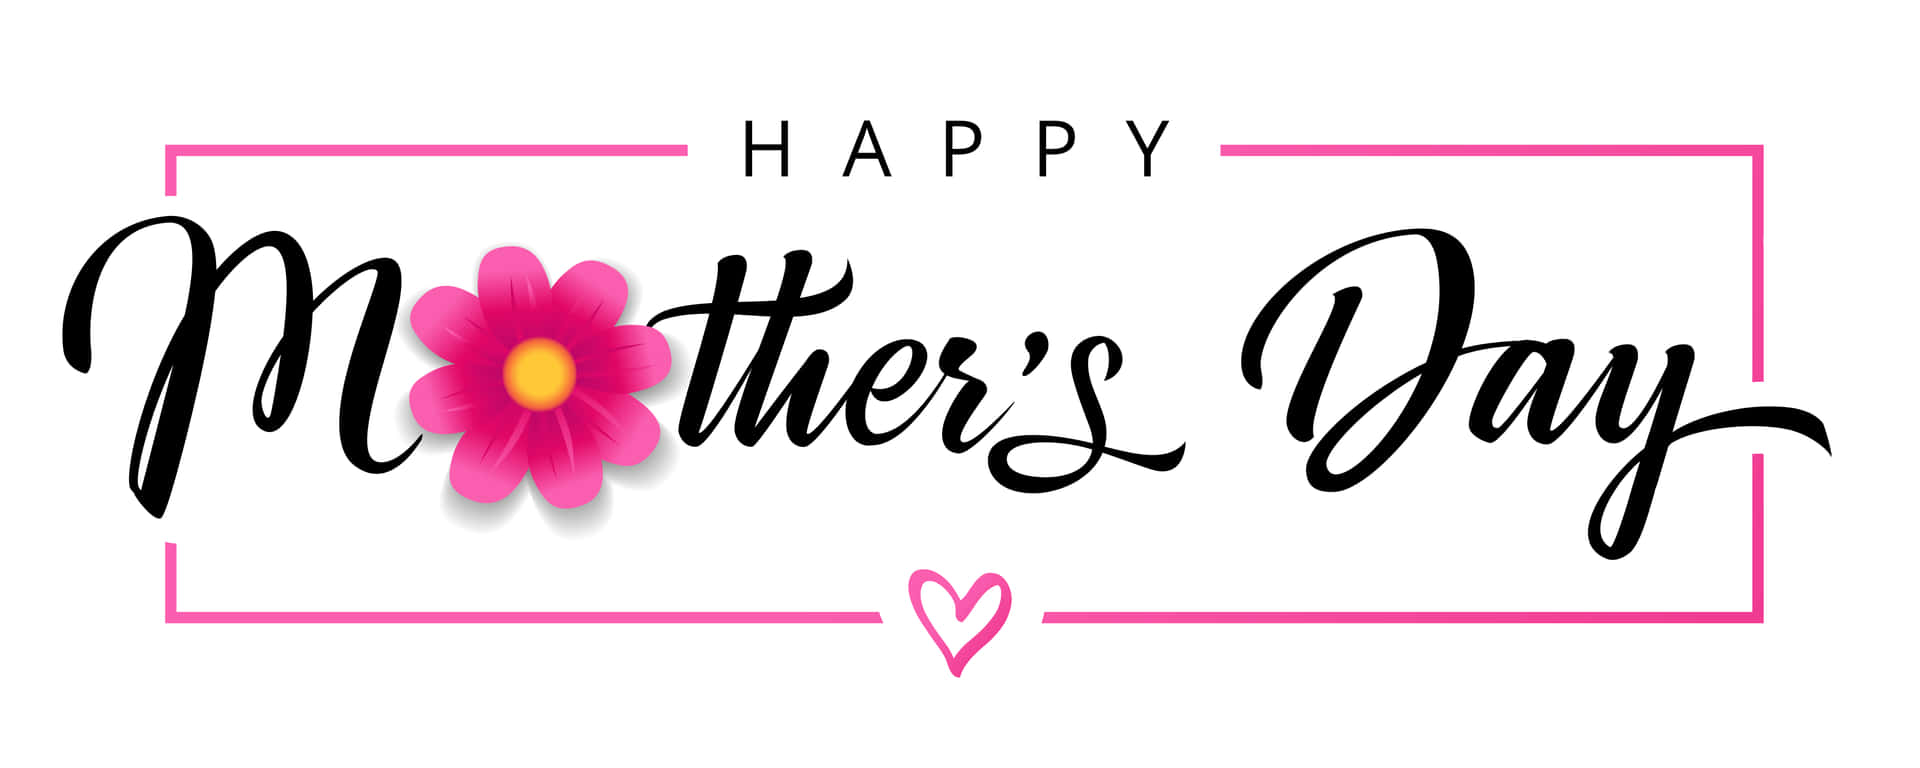 Happy Mothers Day! Celebrate the special women in your life with love and appreciation. Wallpaper